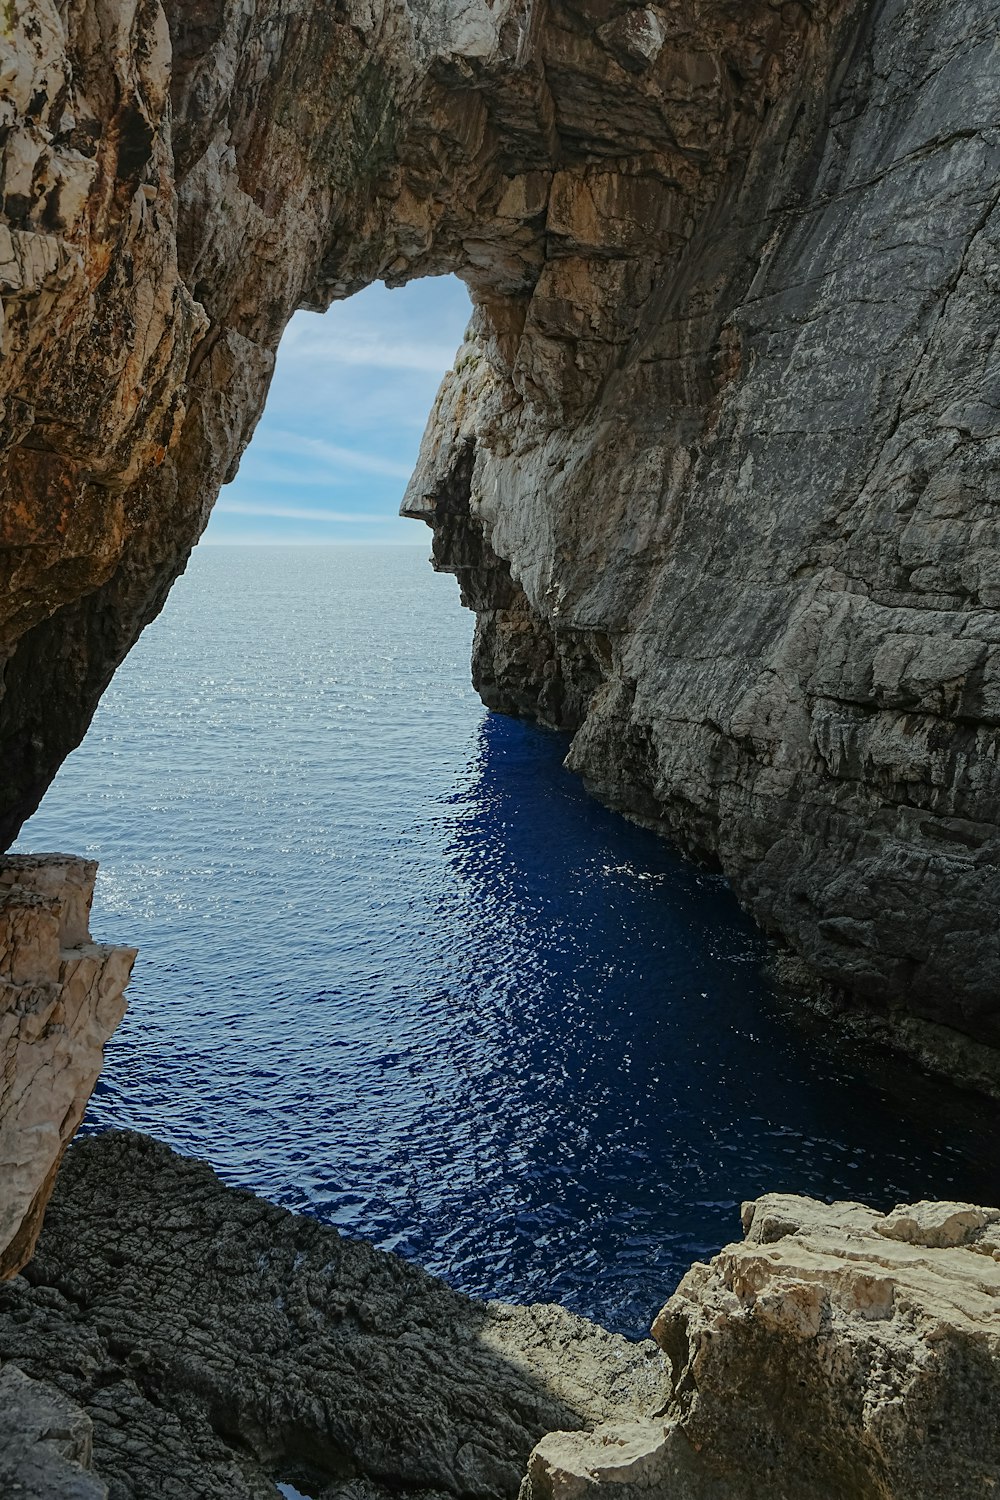 a view of a body of water from a rocky cliff